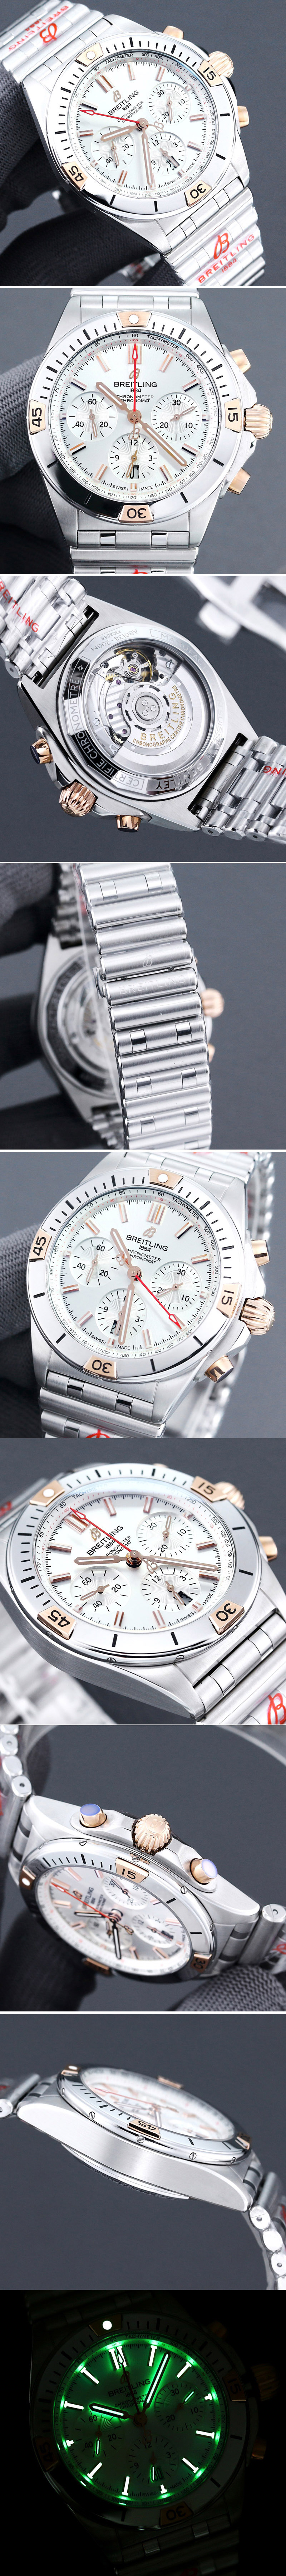 Replica Breitling Chronomat B01 42mm SS TF 1:1 Best Edition Silver Dial on SS Bracelet A7750